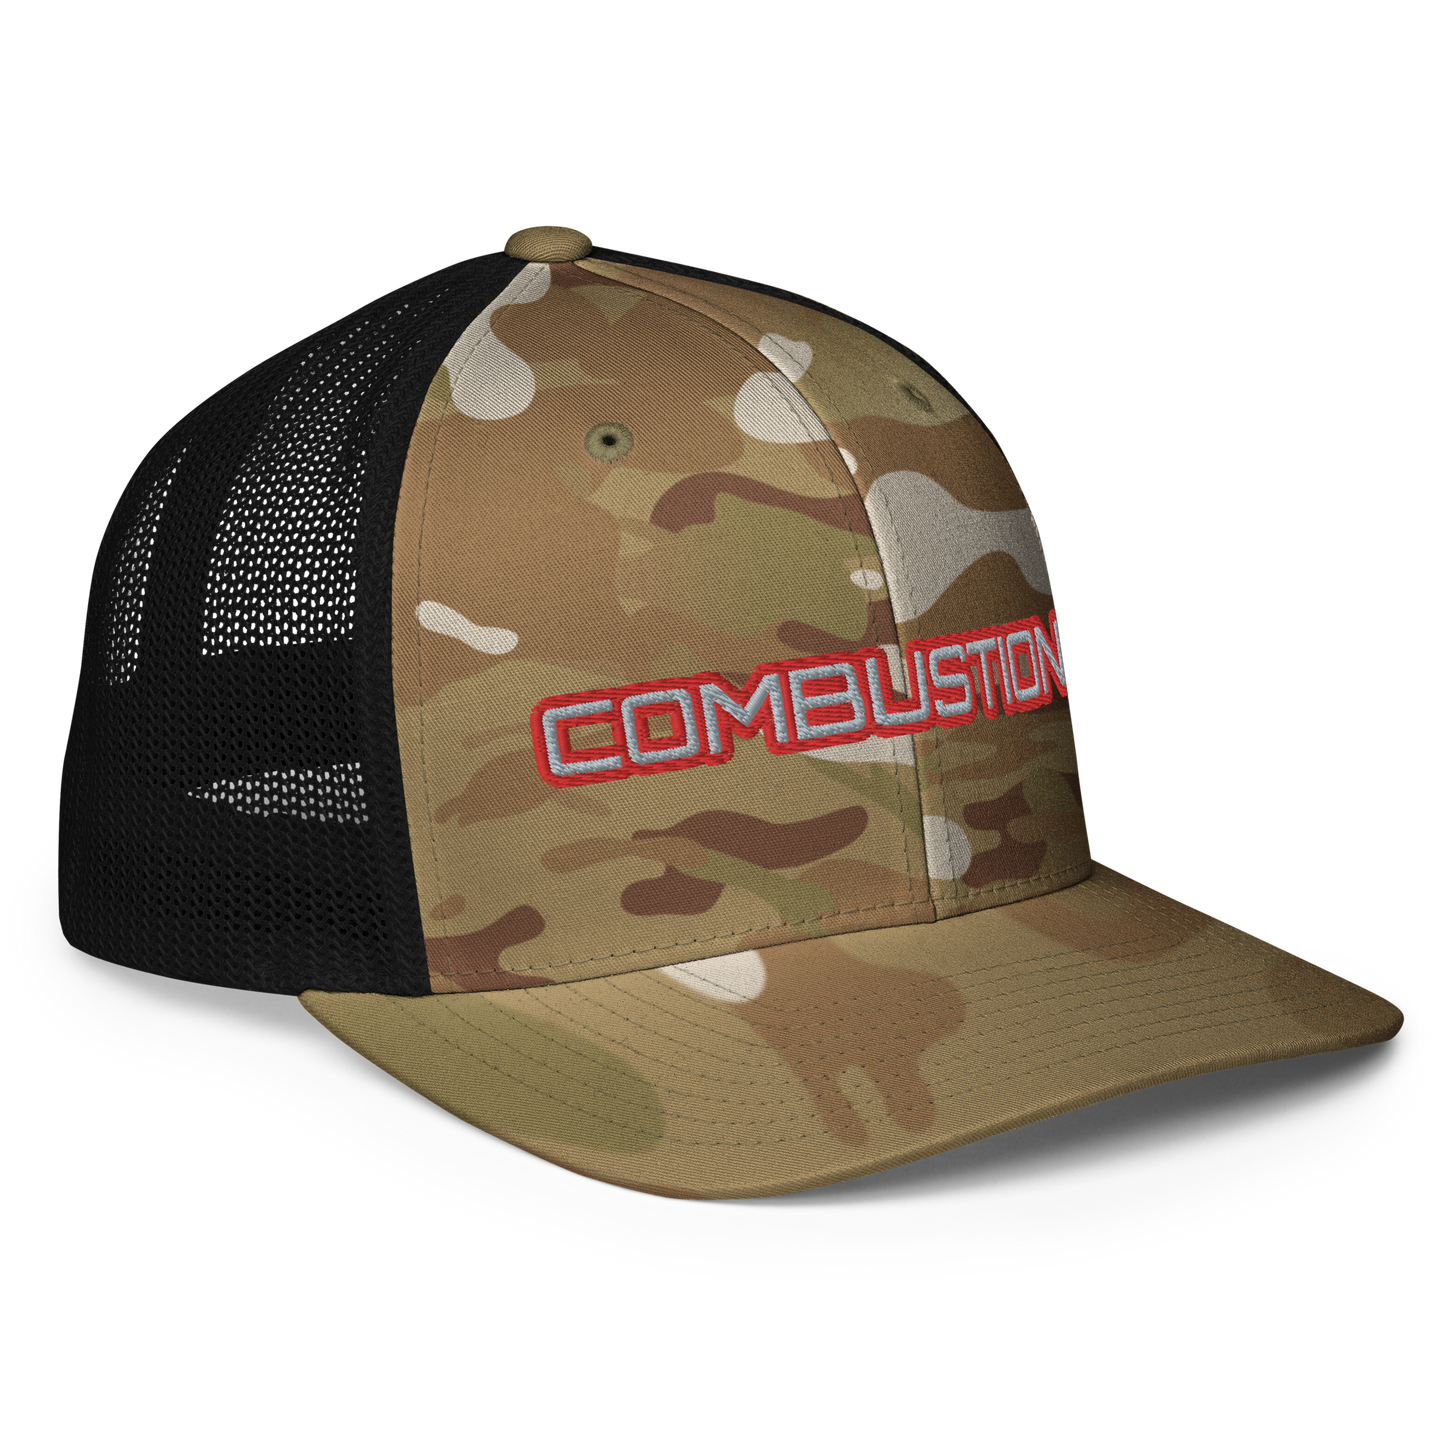 COMBUSTION HAT